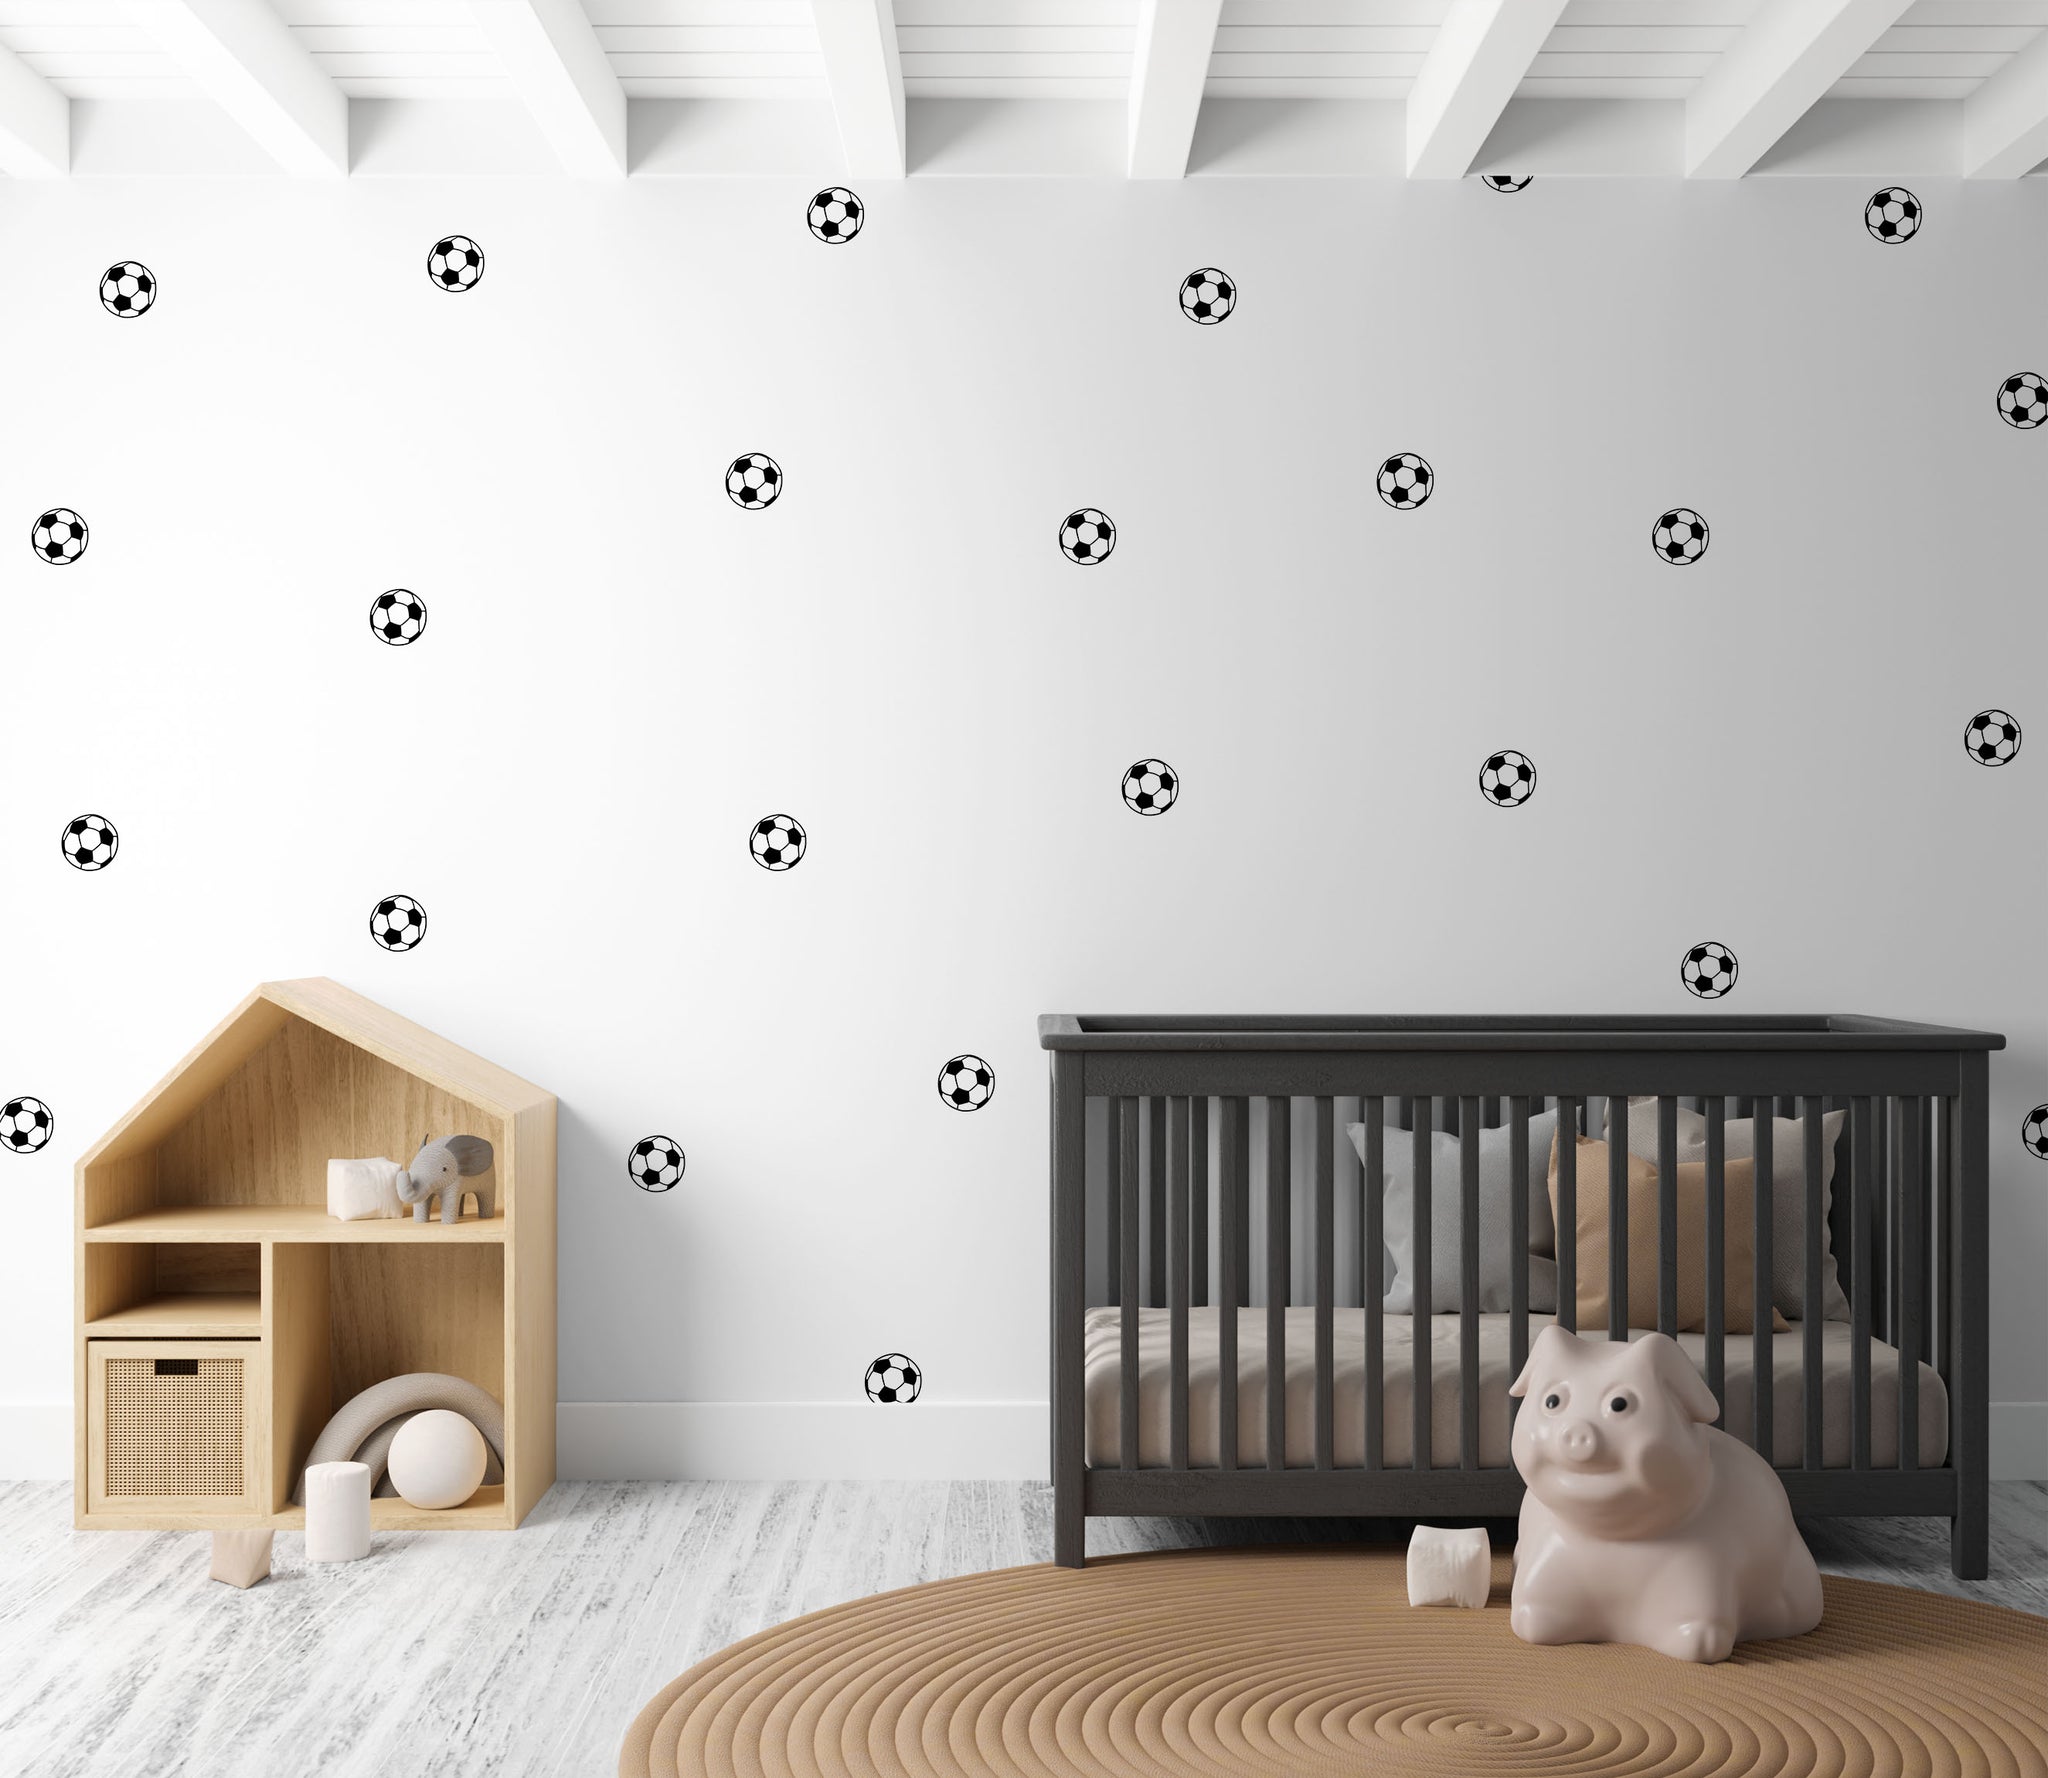 White Football Wall Stickers - Fabric, Reusable and Eco-Friendly